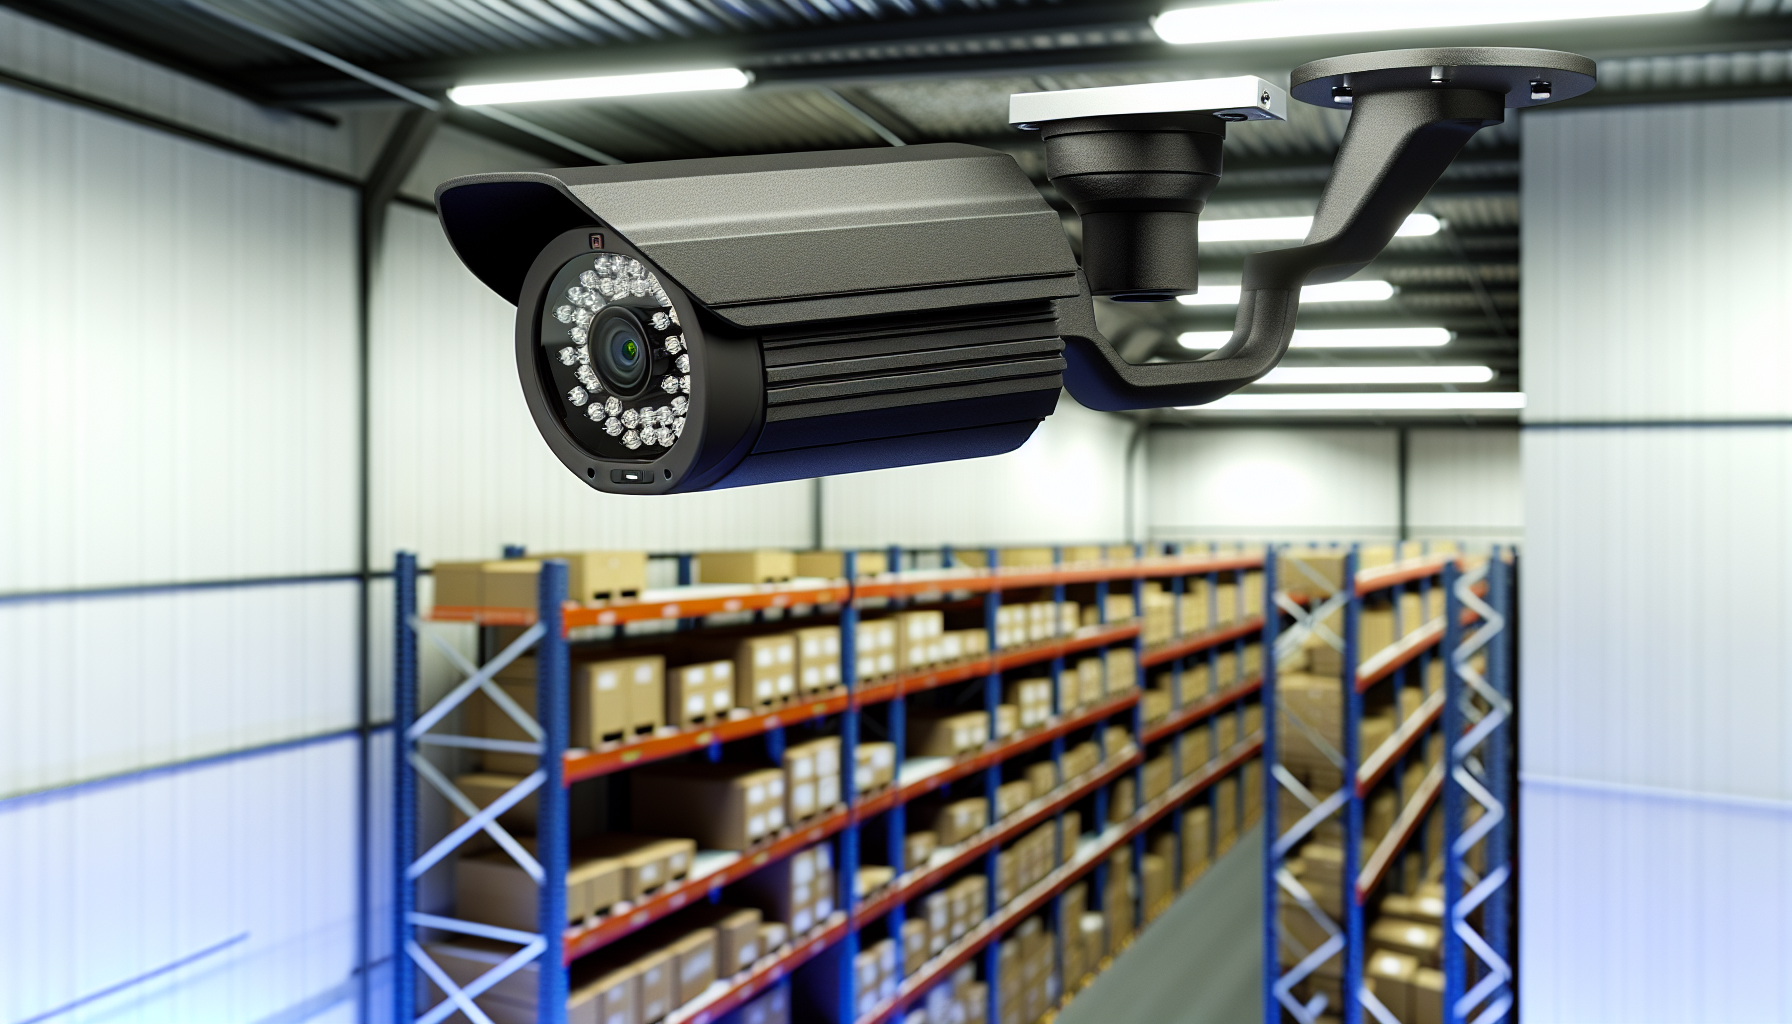 High-definition camera system for surveillance in a storage facility